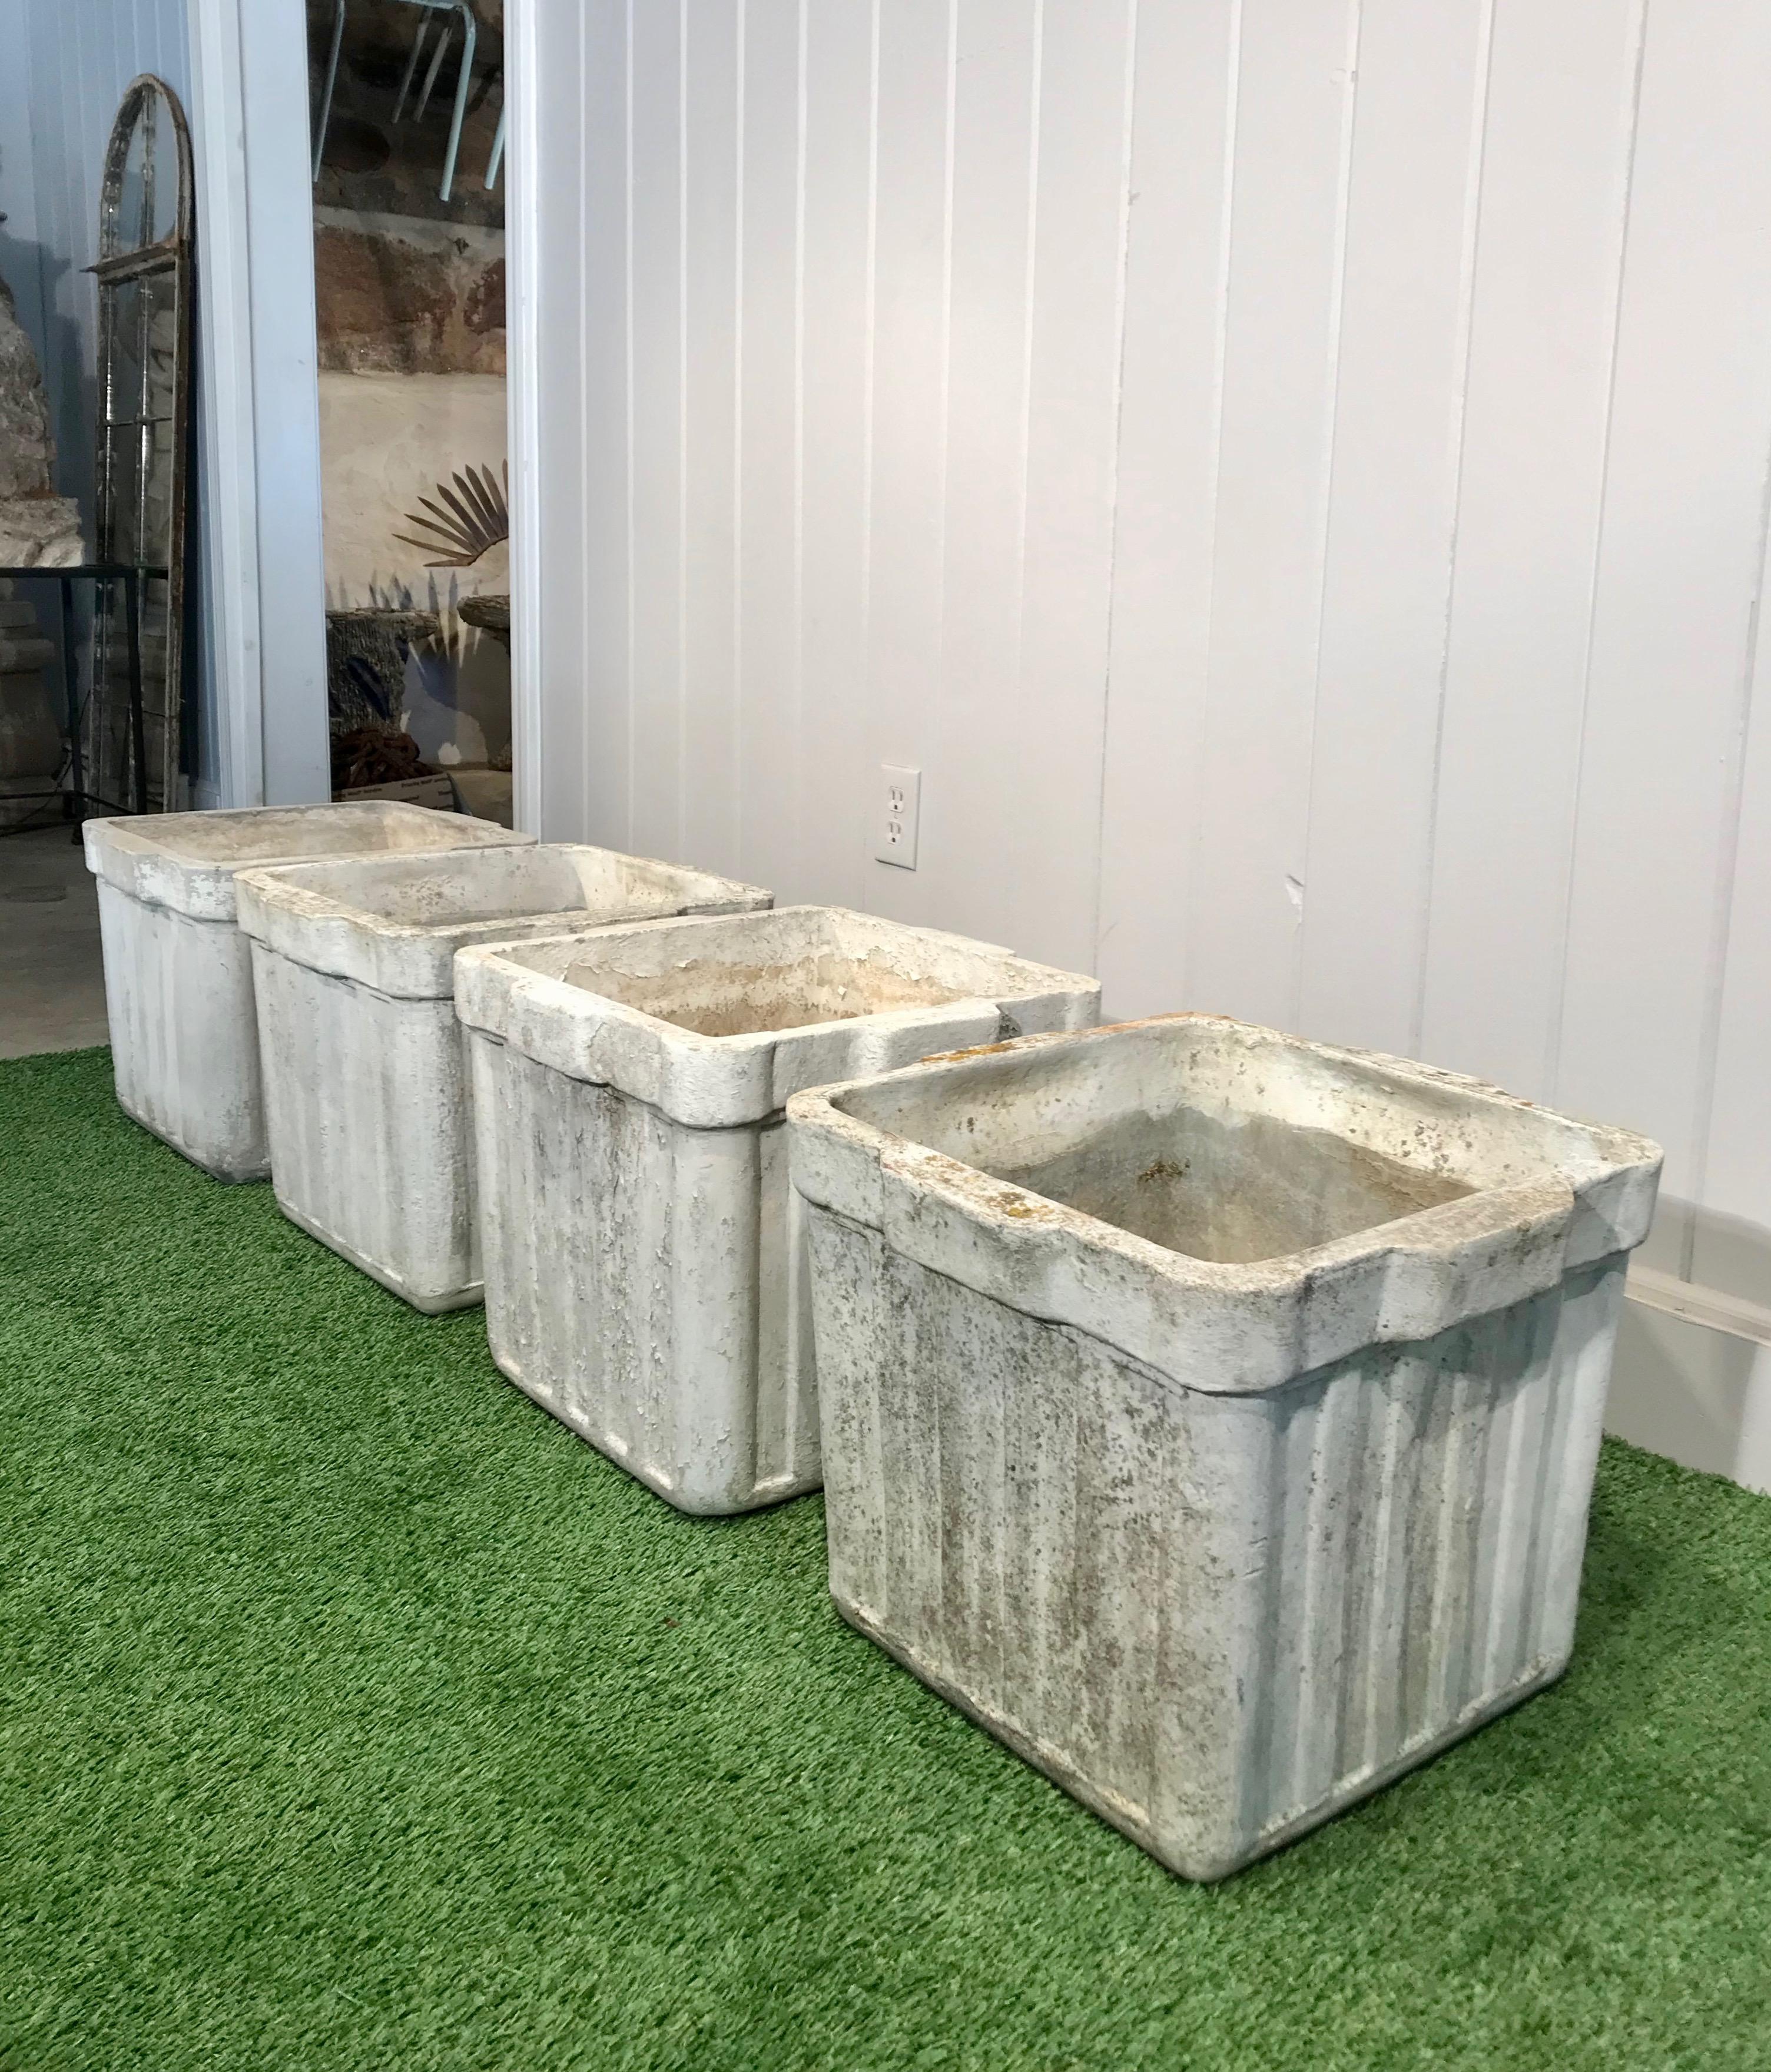 These ribbed planters with integral handles on two sides were designed by the iconic Willy Guhl and produced by Eternit of Switzerland in three sizes. These are the medium-sized ones. In very good structural condition, they feature a